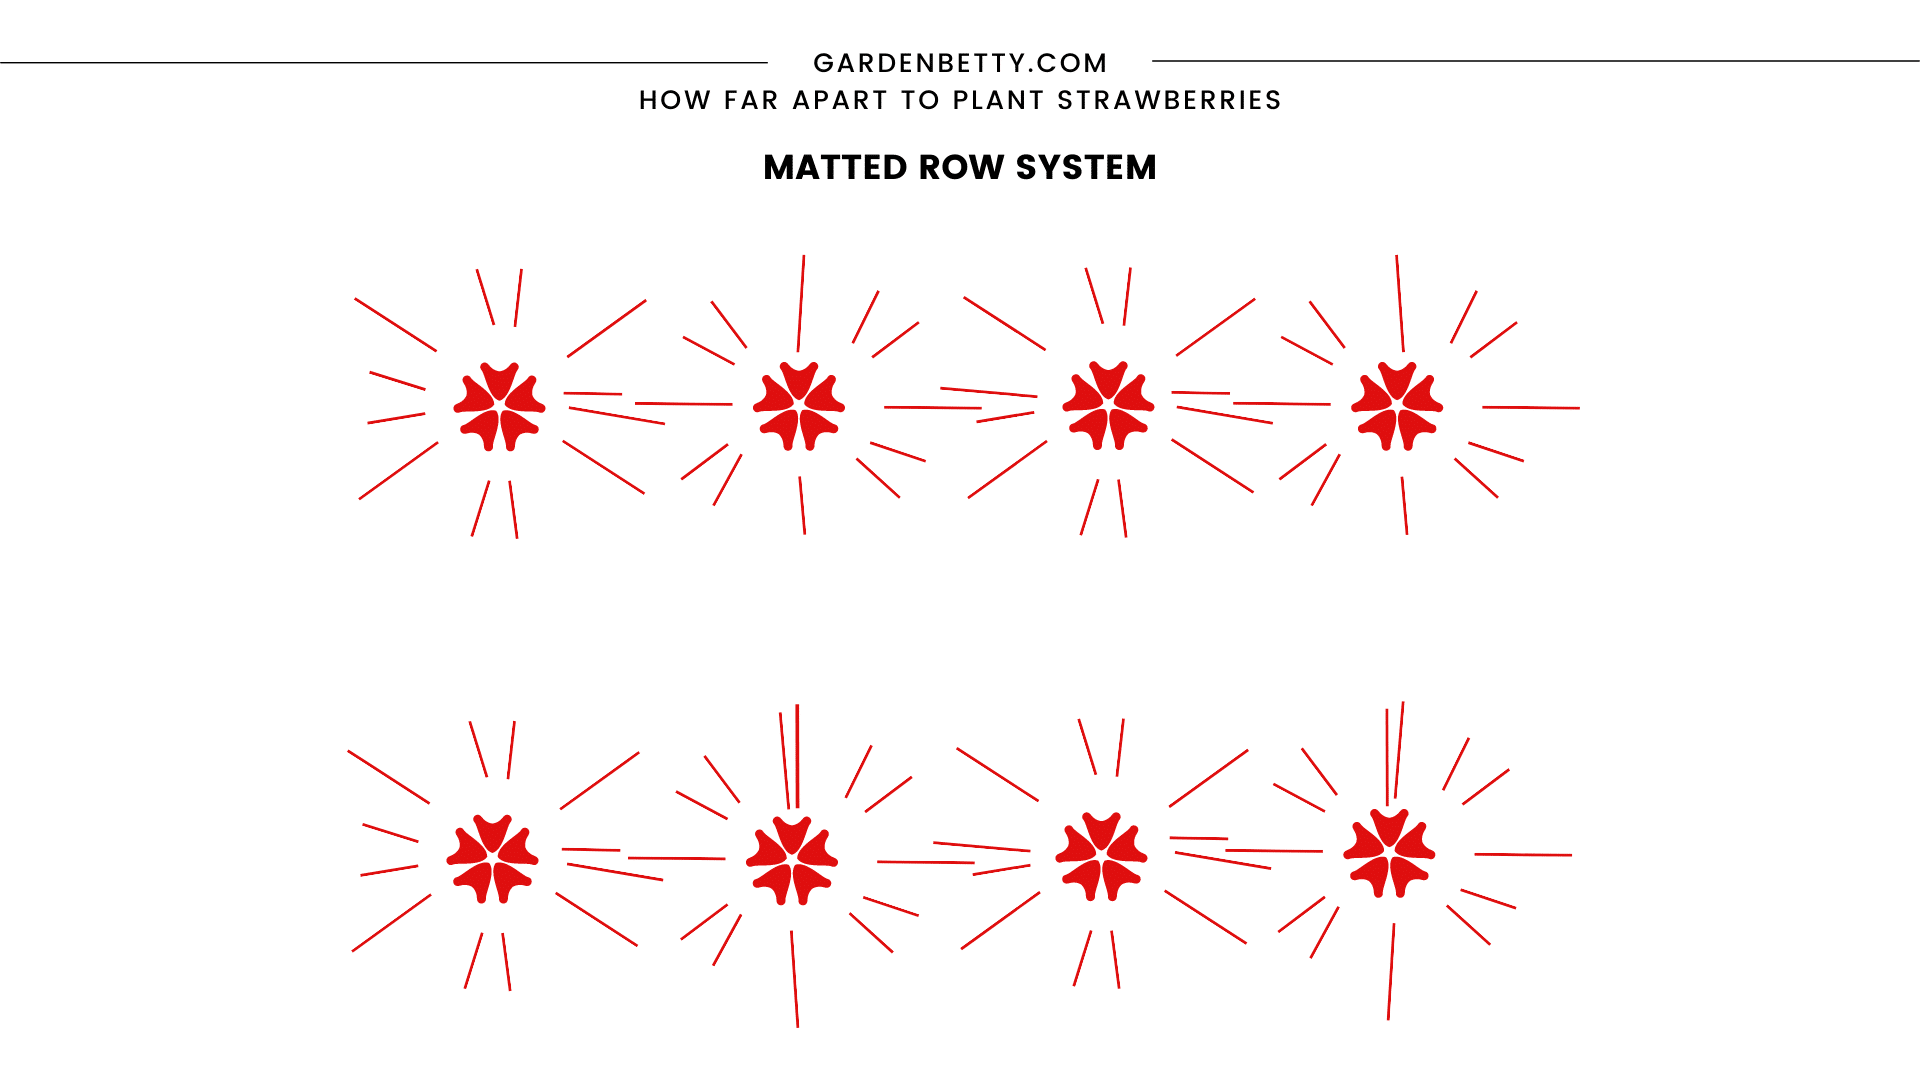 Illustration showing the matted row system of spacing and planting strawberries